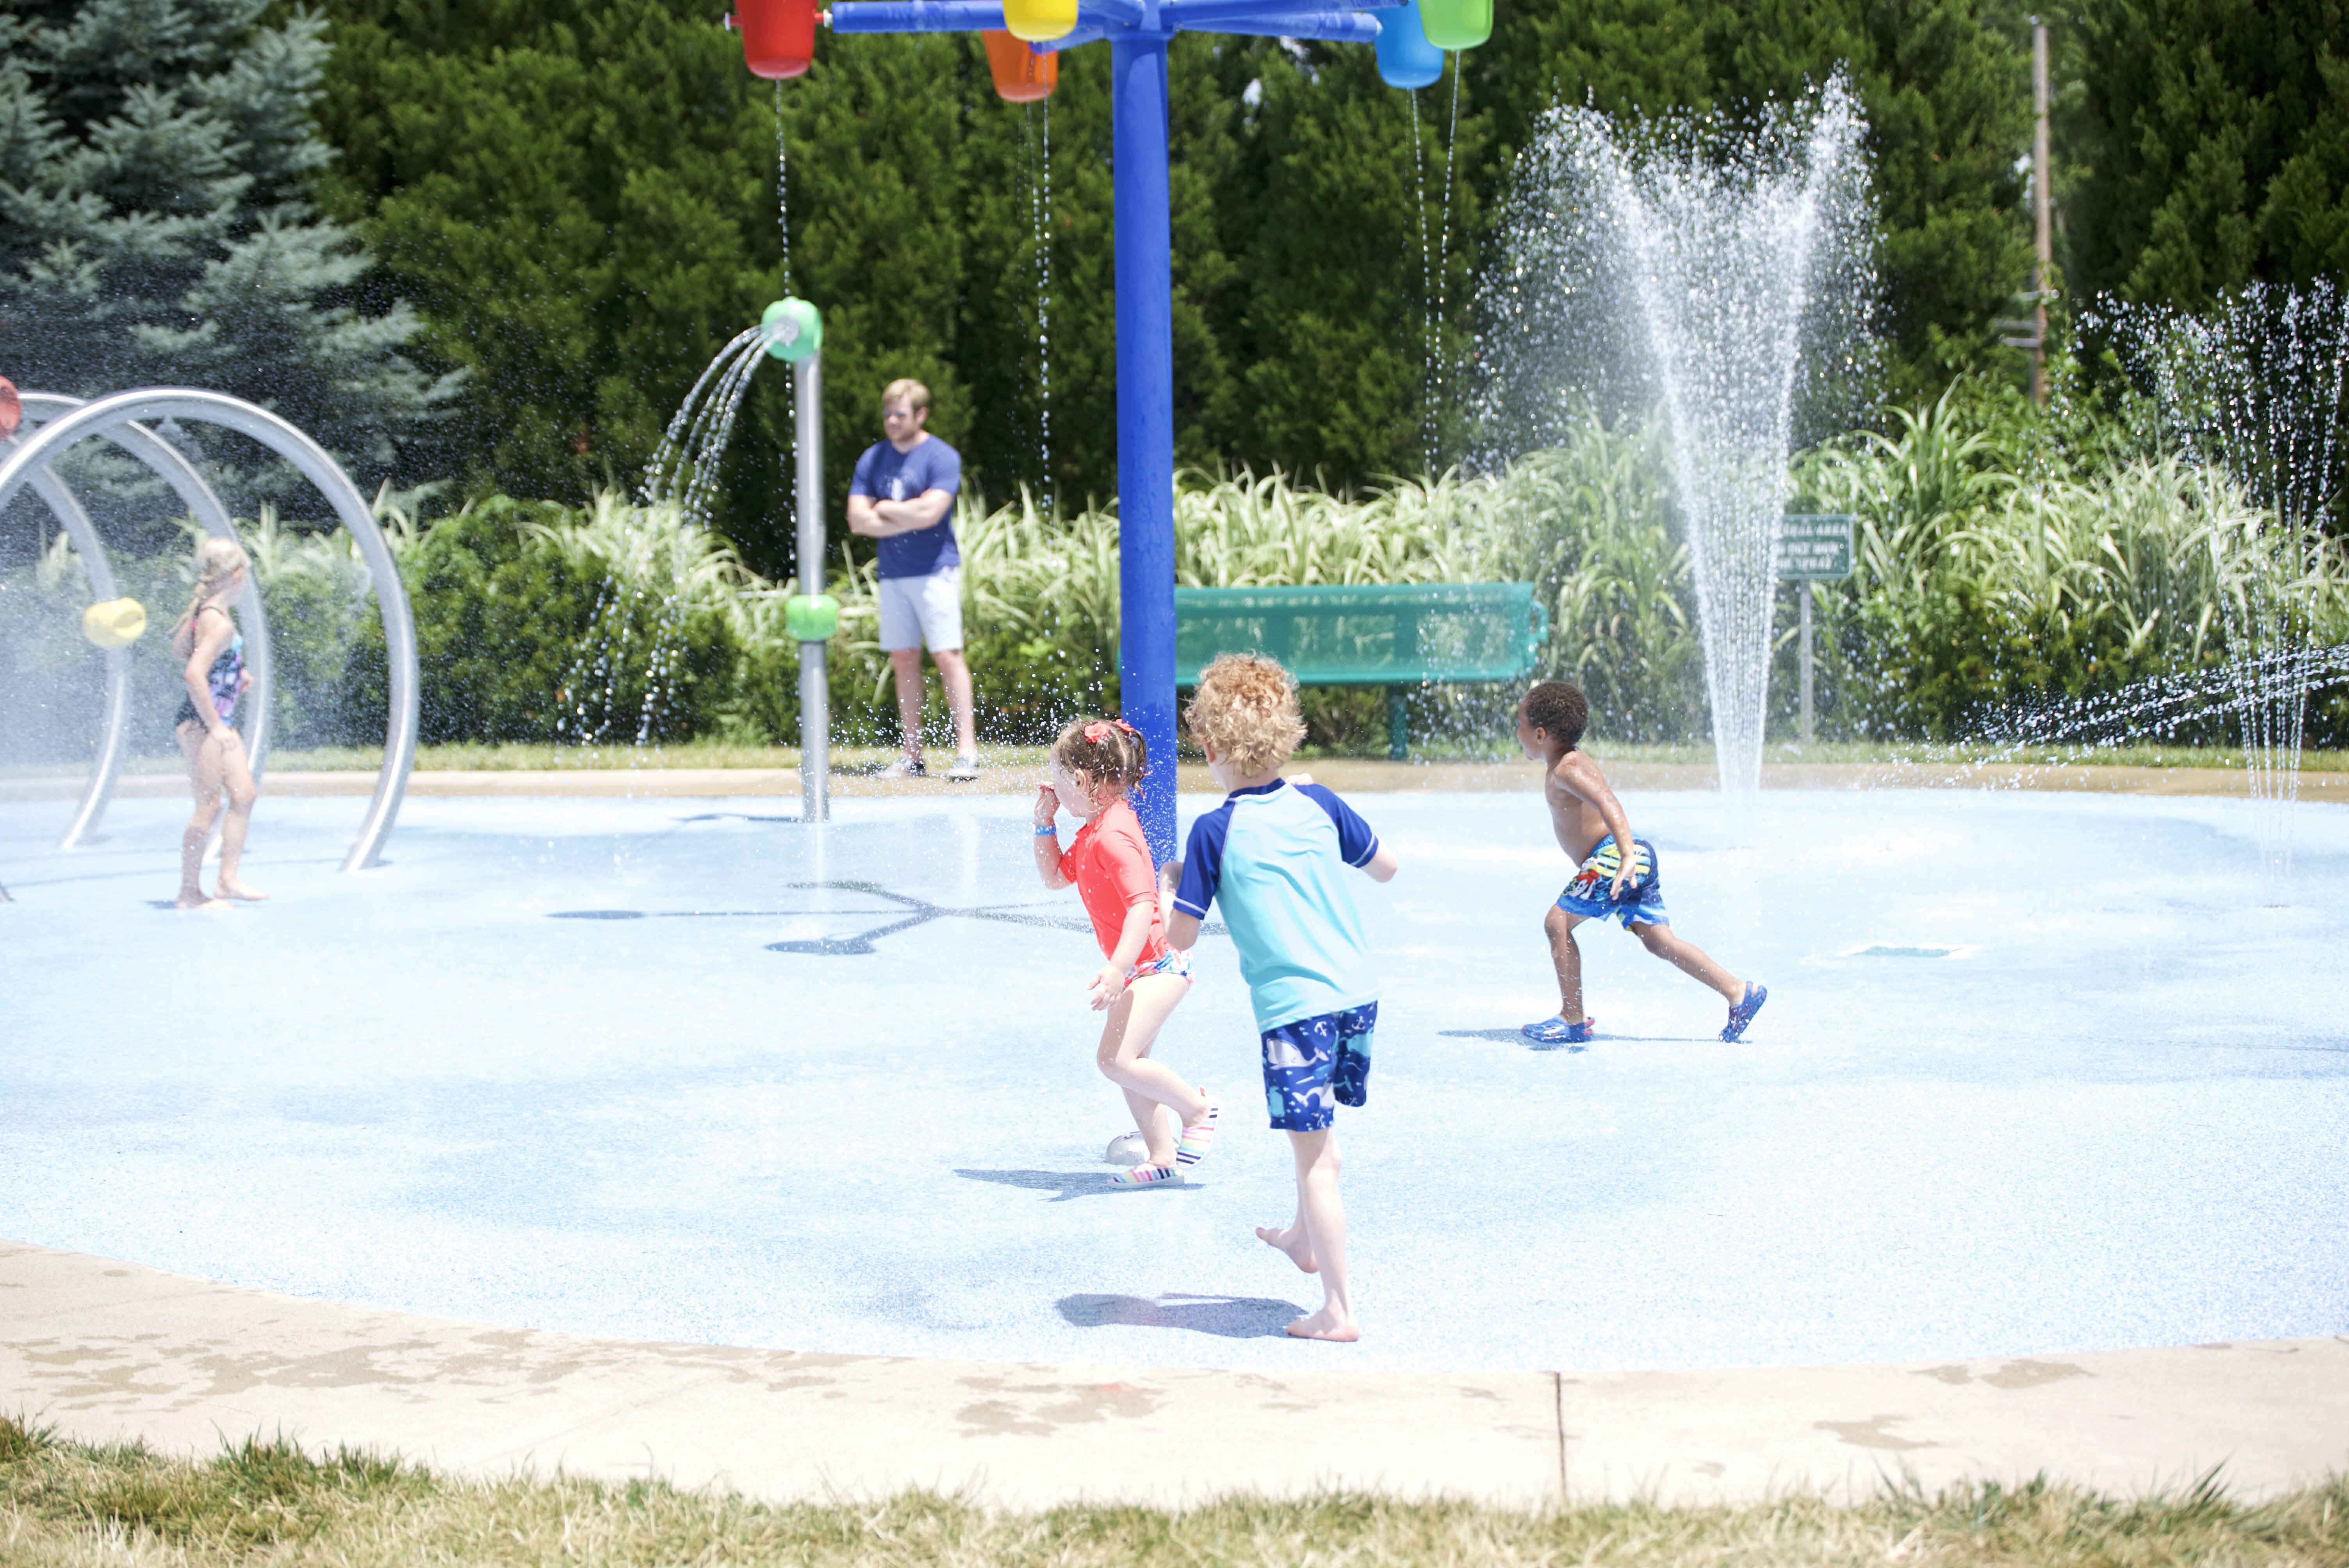 City of Powell, Ohio Splash Pad opens for the season after Memorial